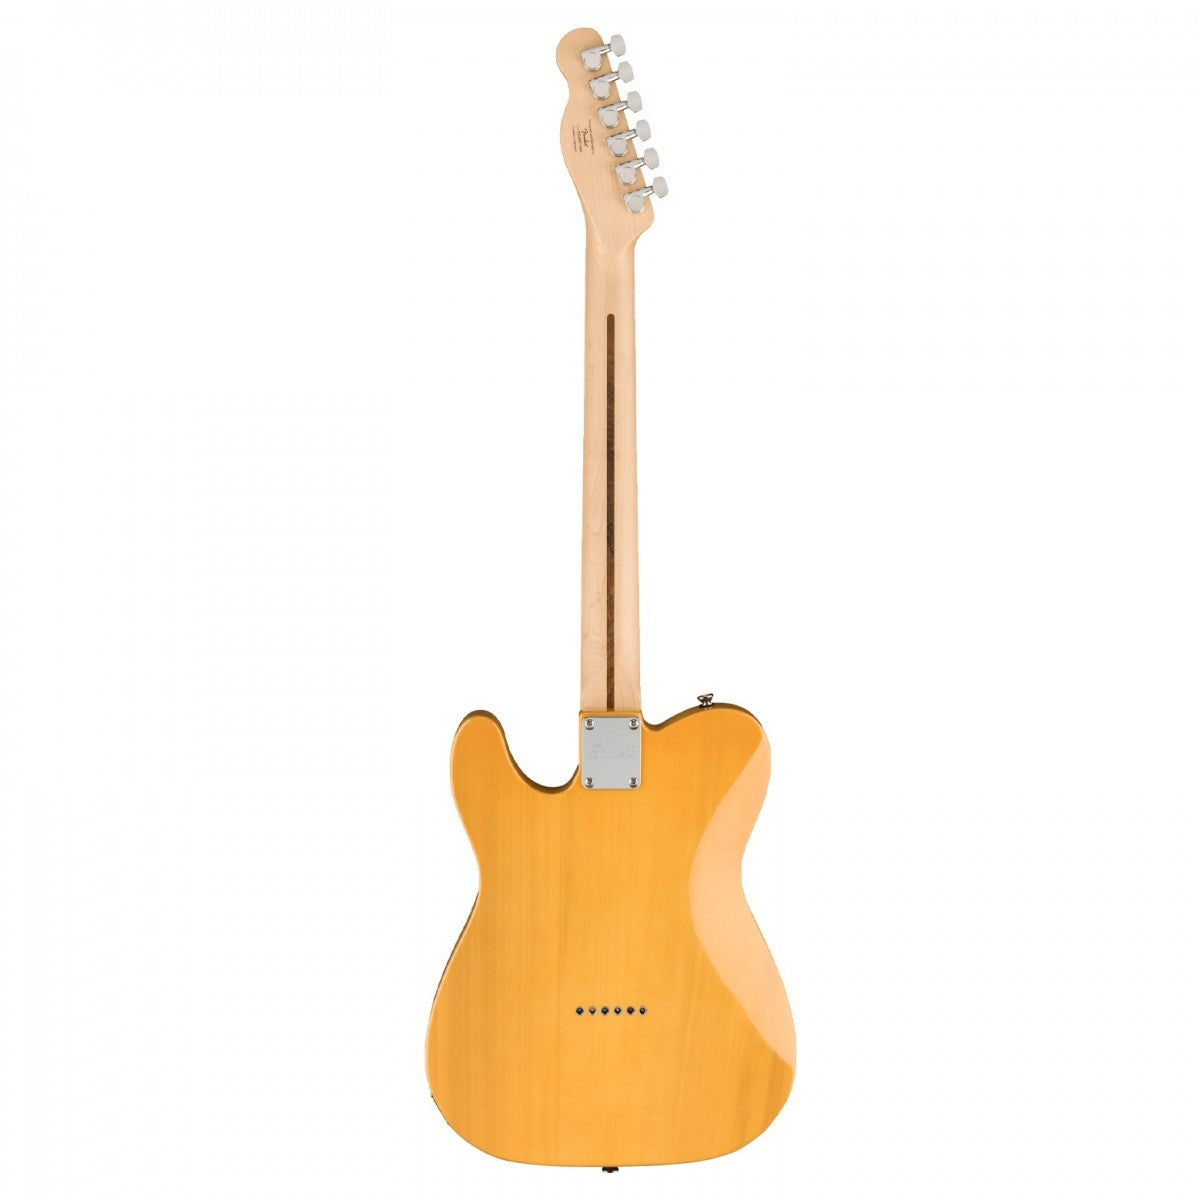 Squier Affinity Series Telecaster, Maple Fingerboard - Việt Music